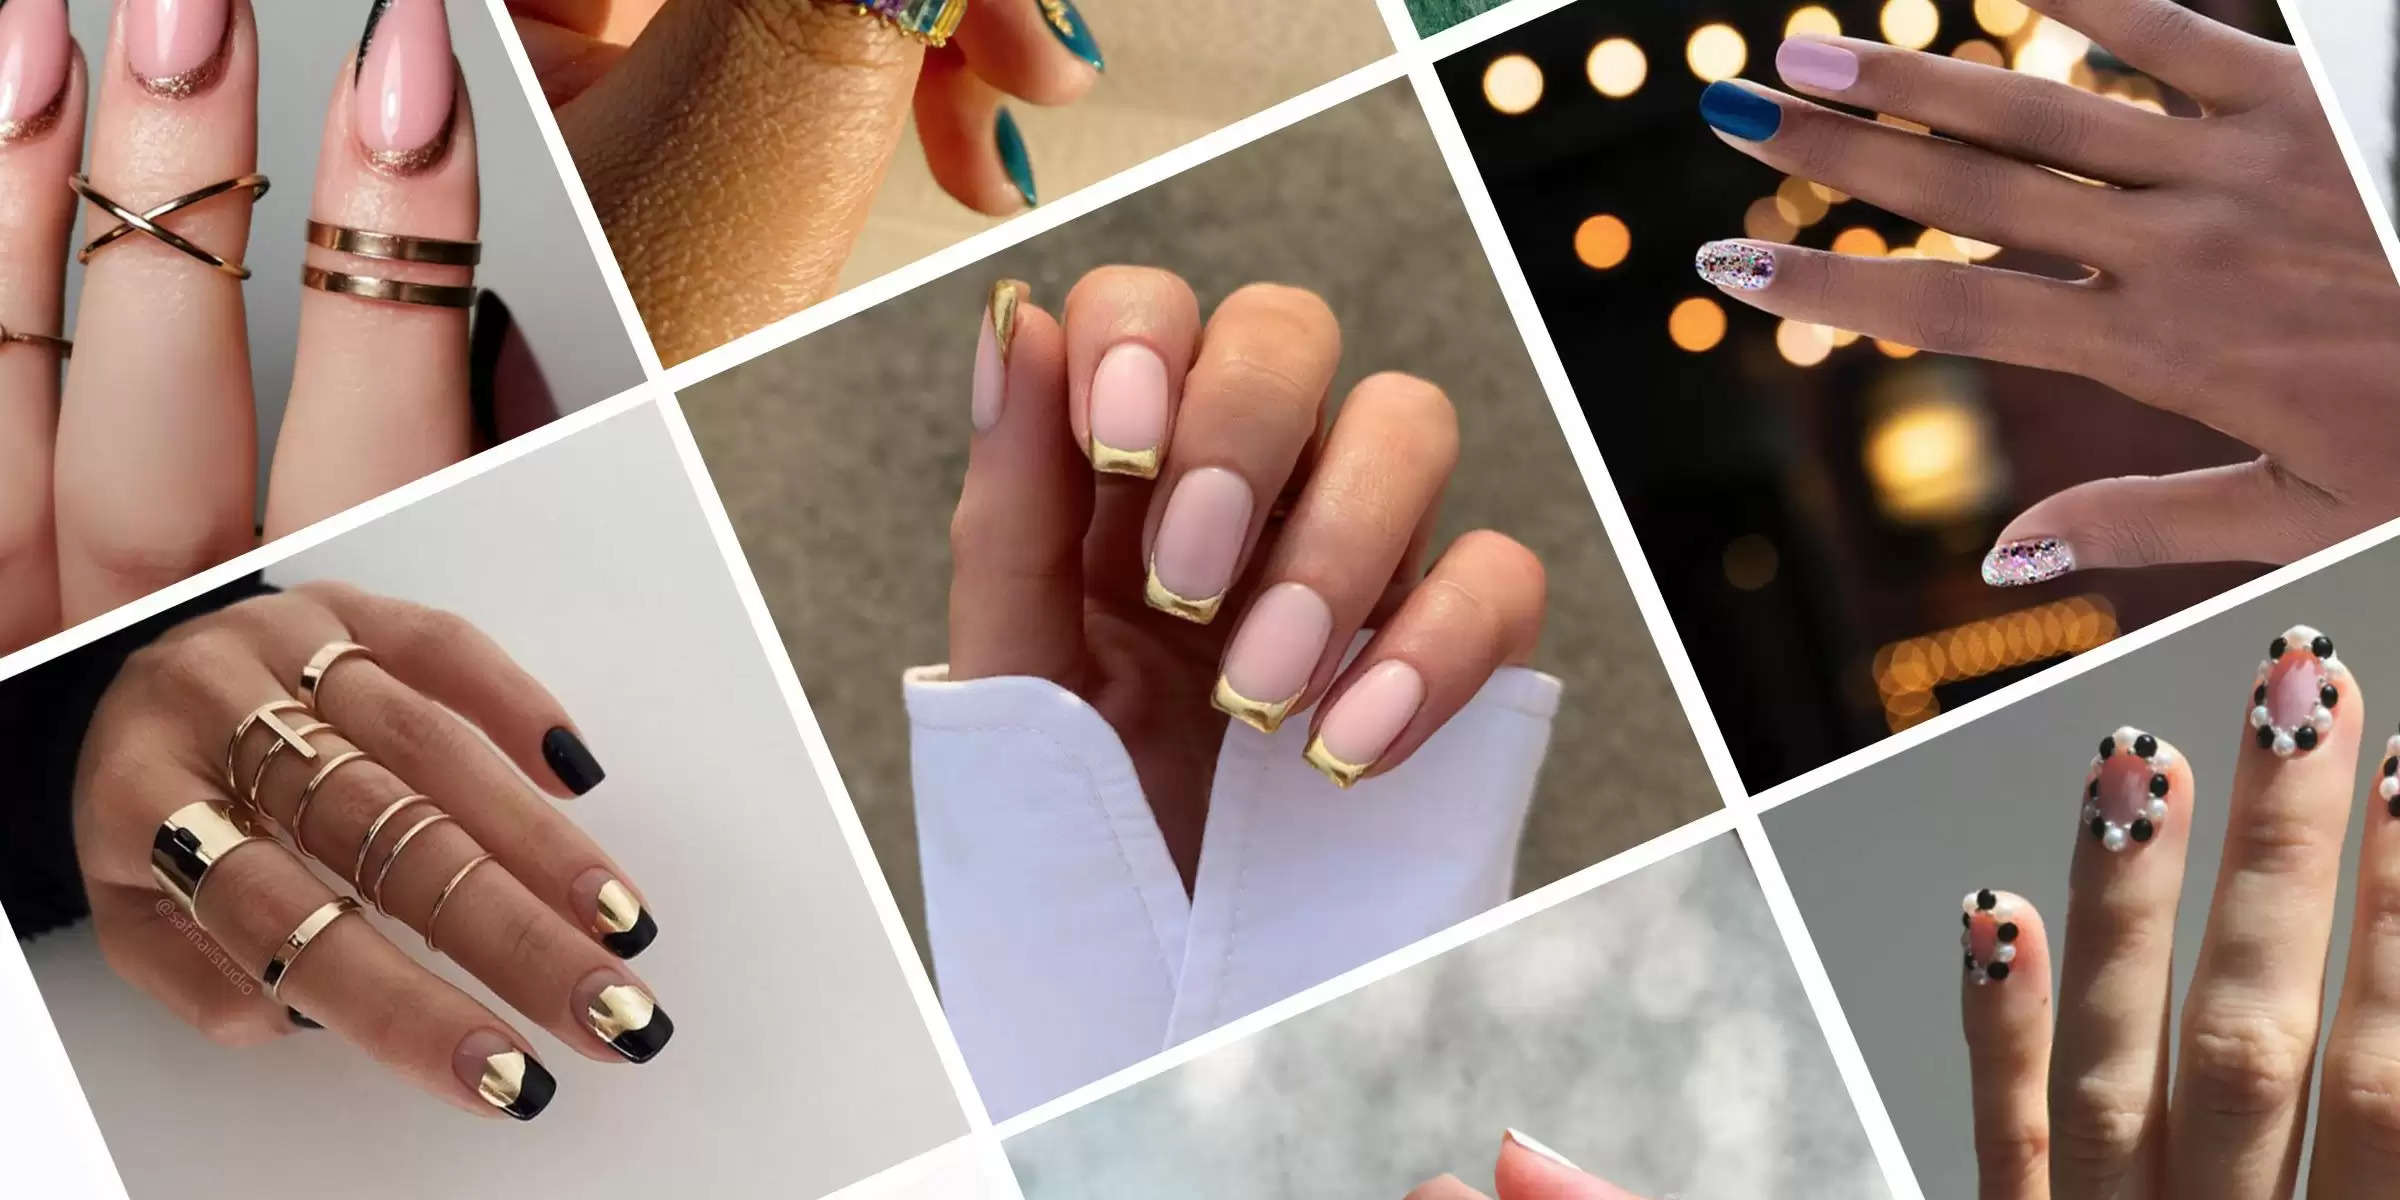 Make your hand beautiful with these nail art designs